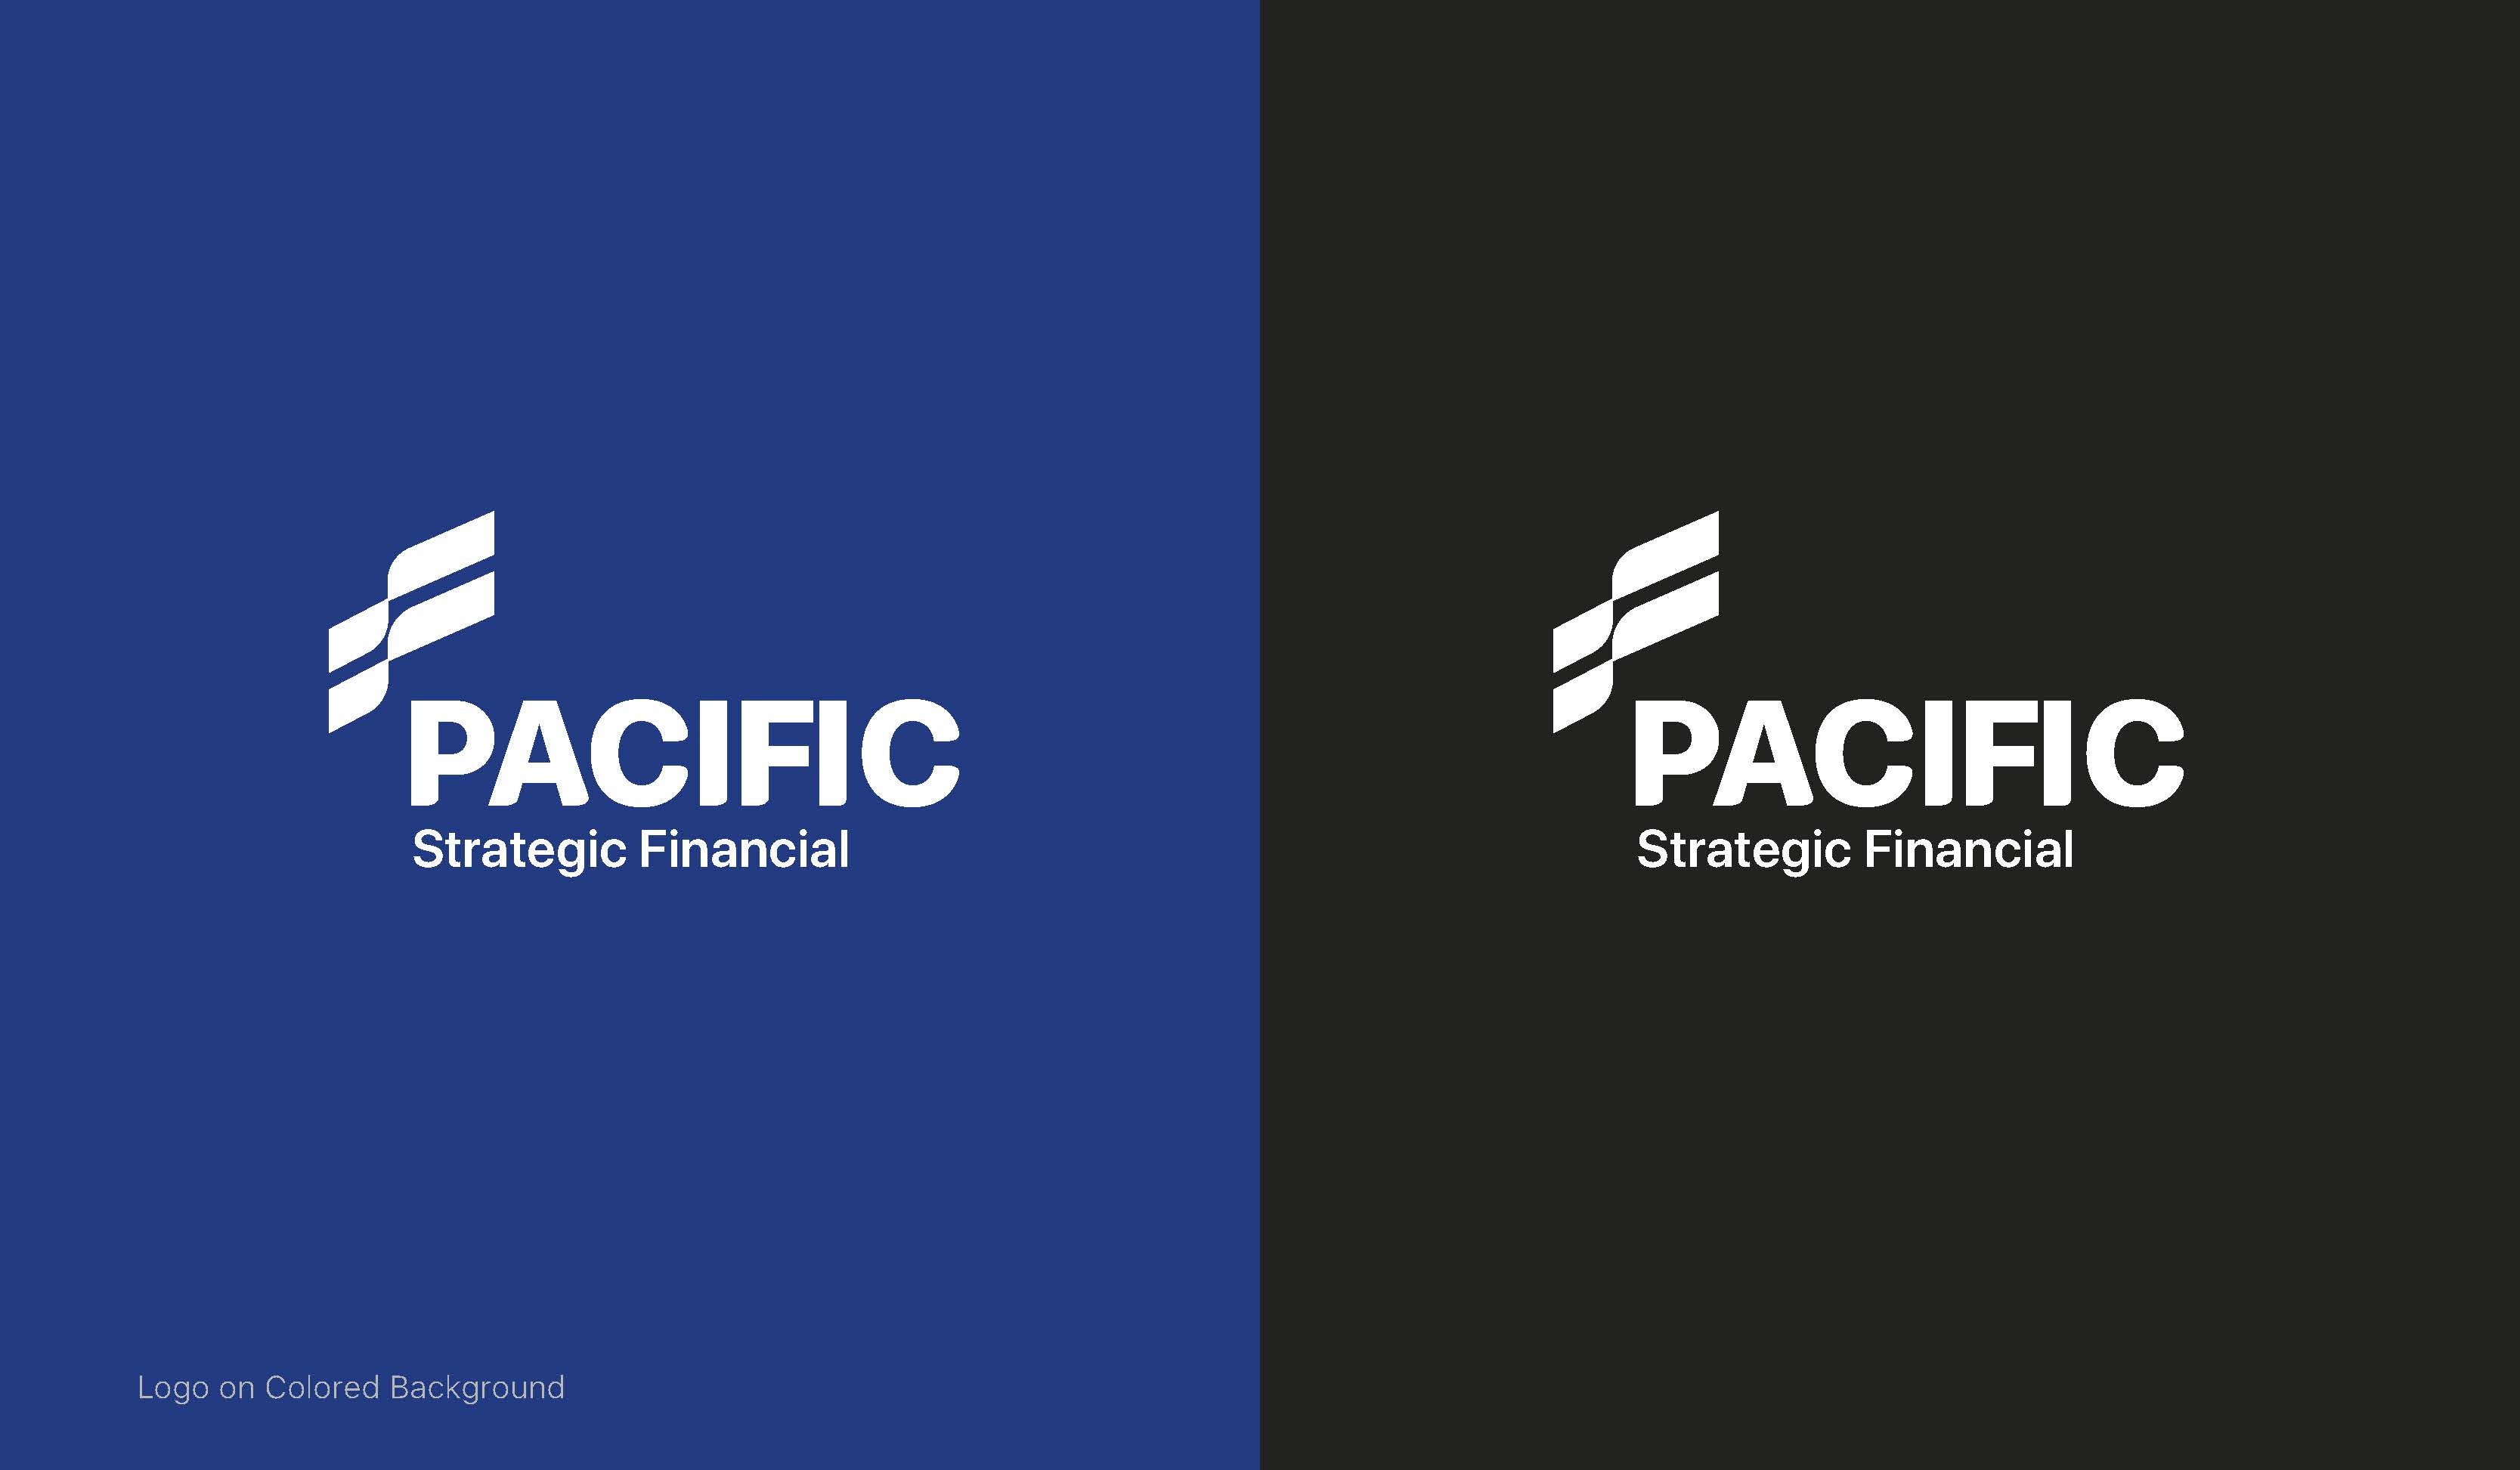 20180531 PACIFIC LOGO brand guidelines deck copy_Page_03